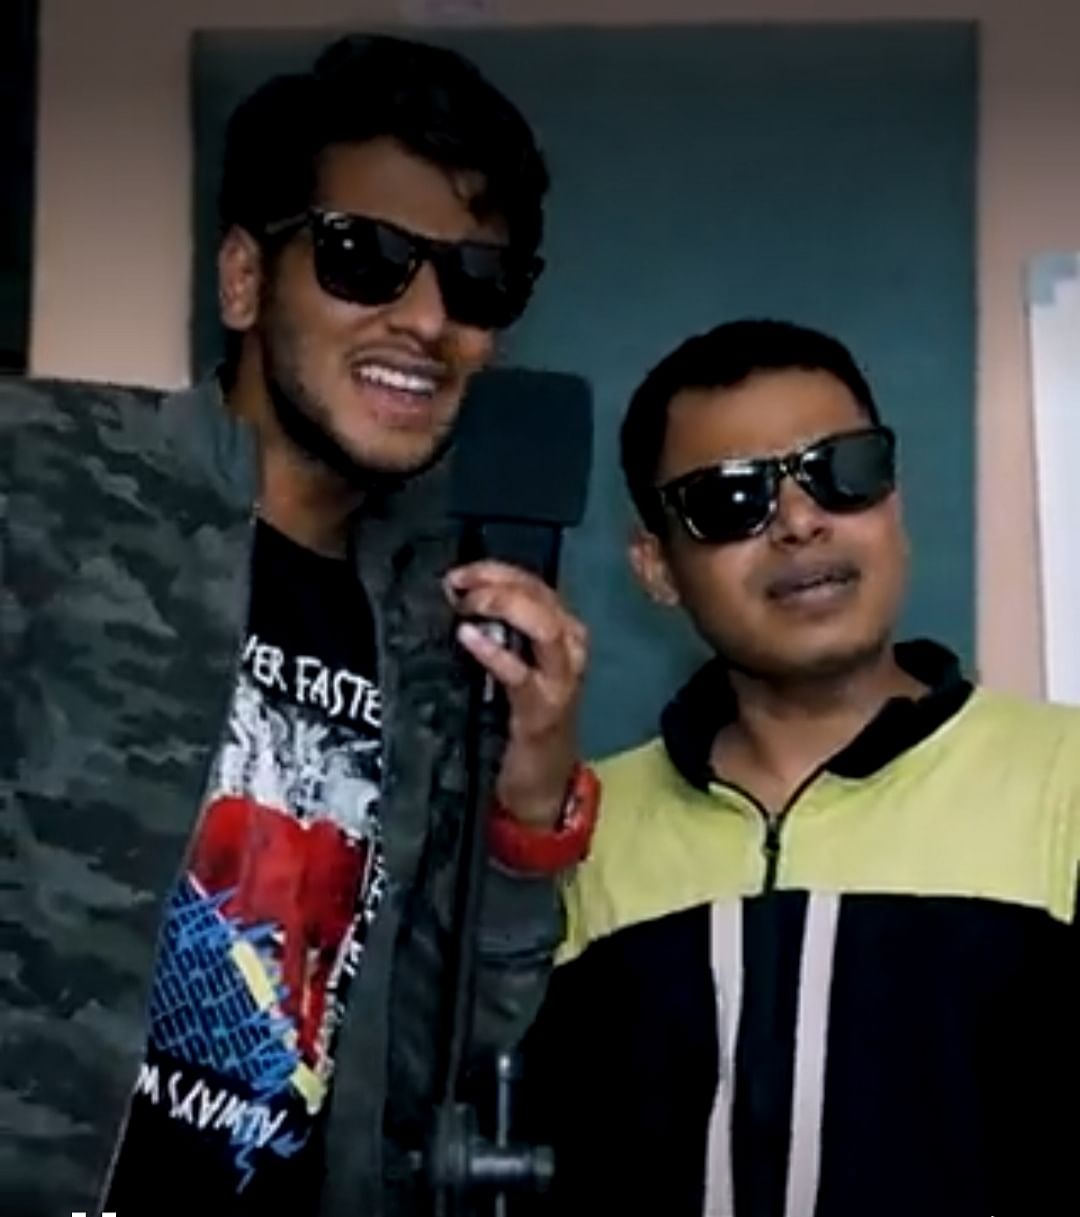 Kannada rap song by (left) Sachit Clare and Vikas Sangam